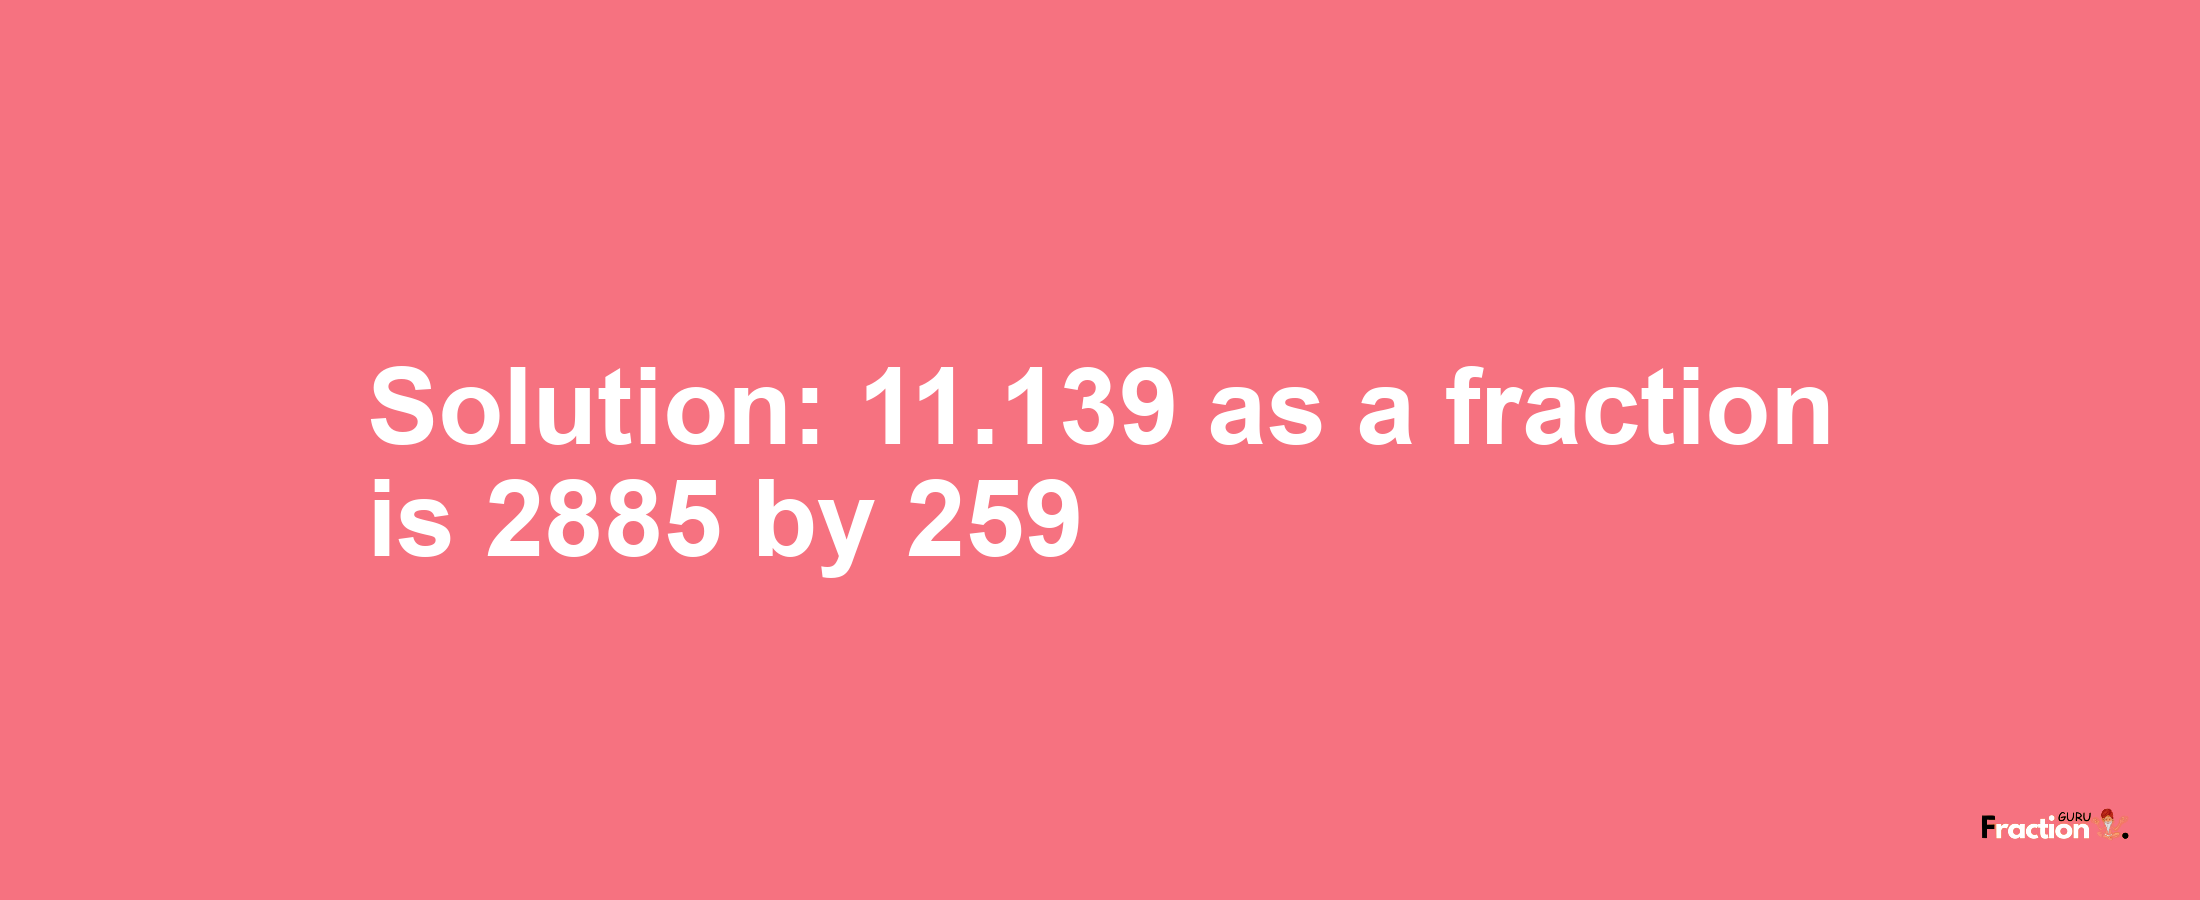 Solution:11.139 as a fraction is 2885/259